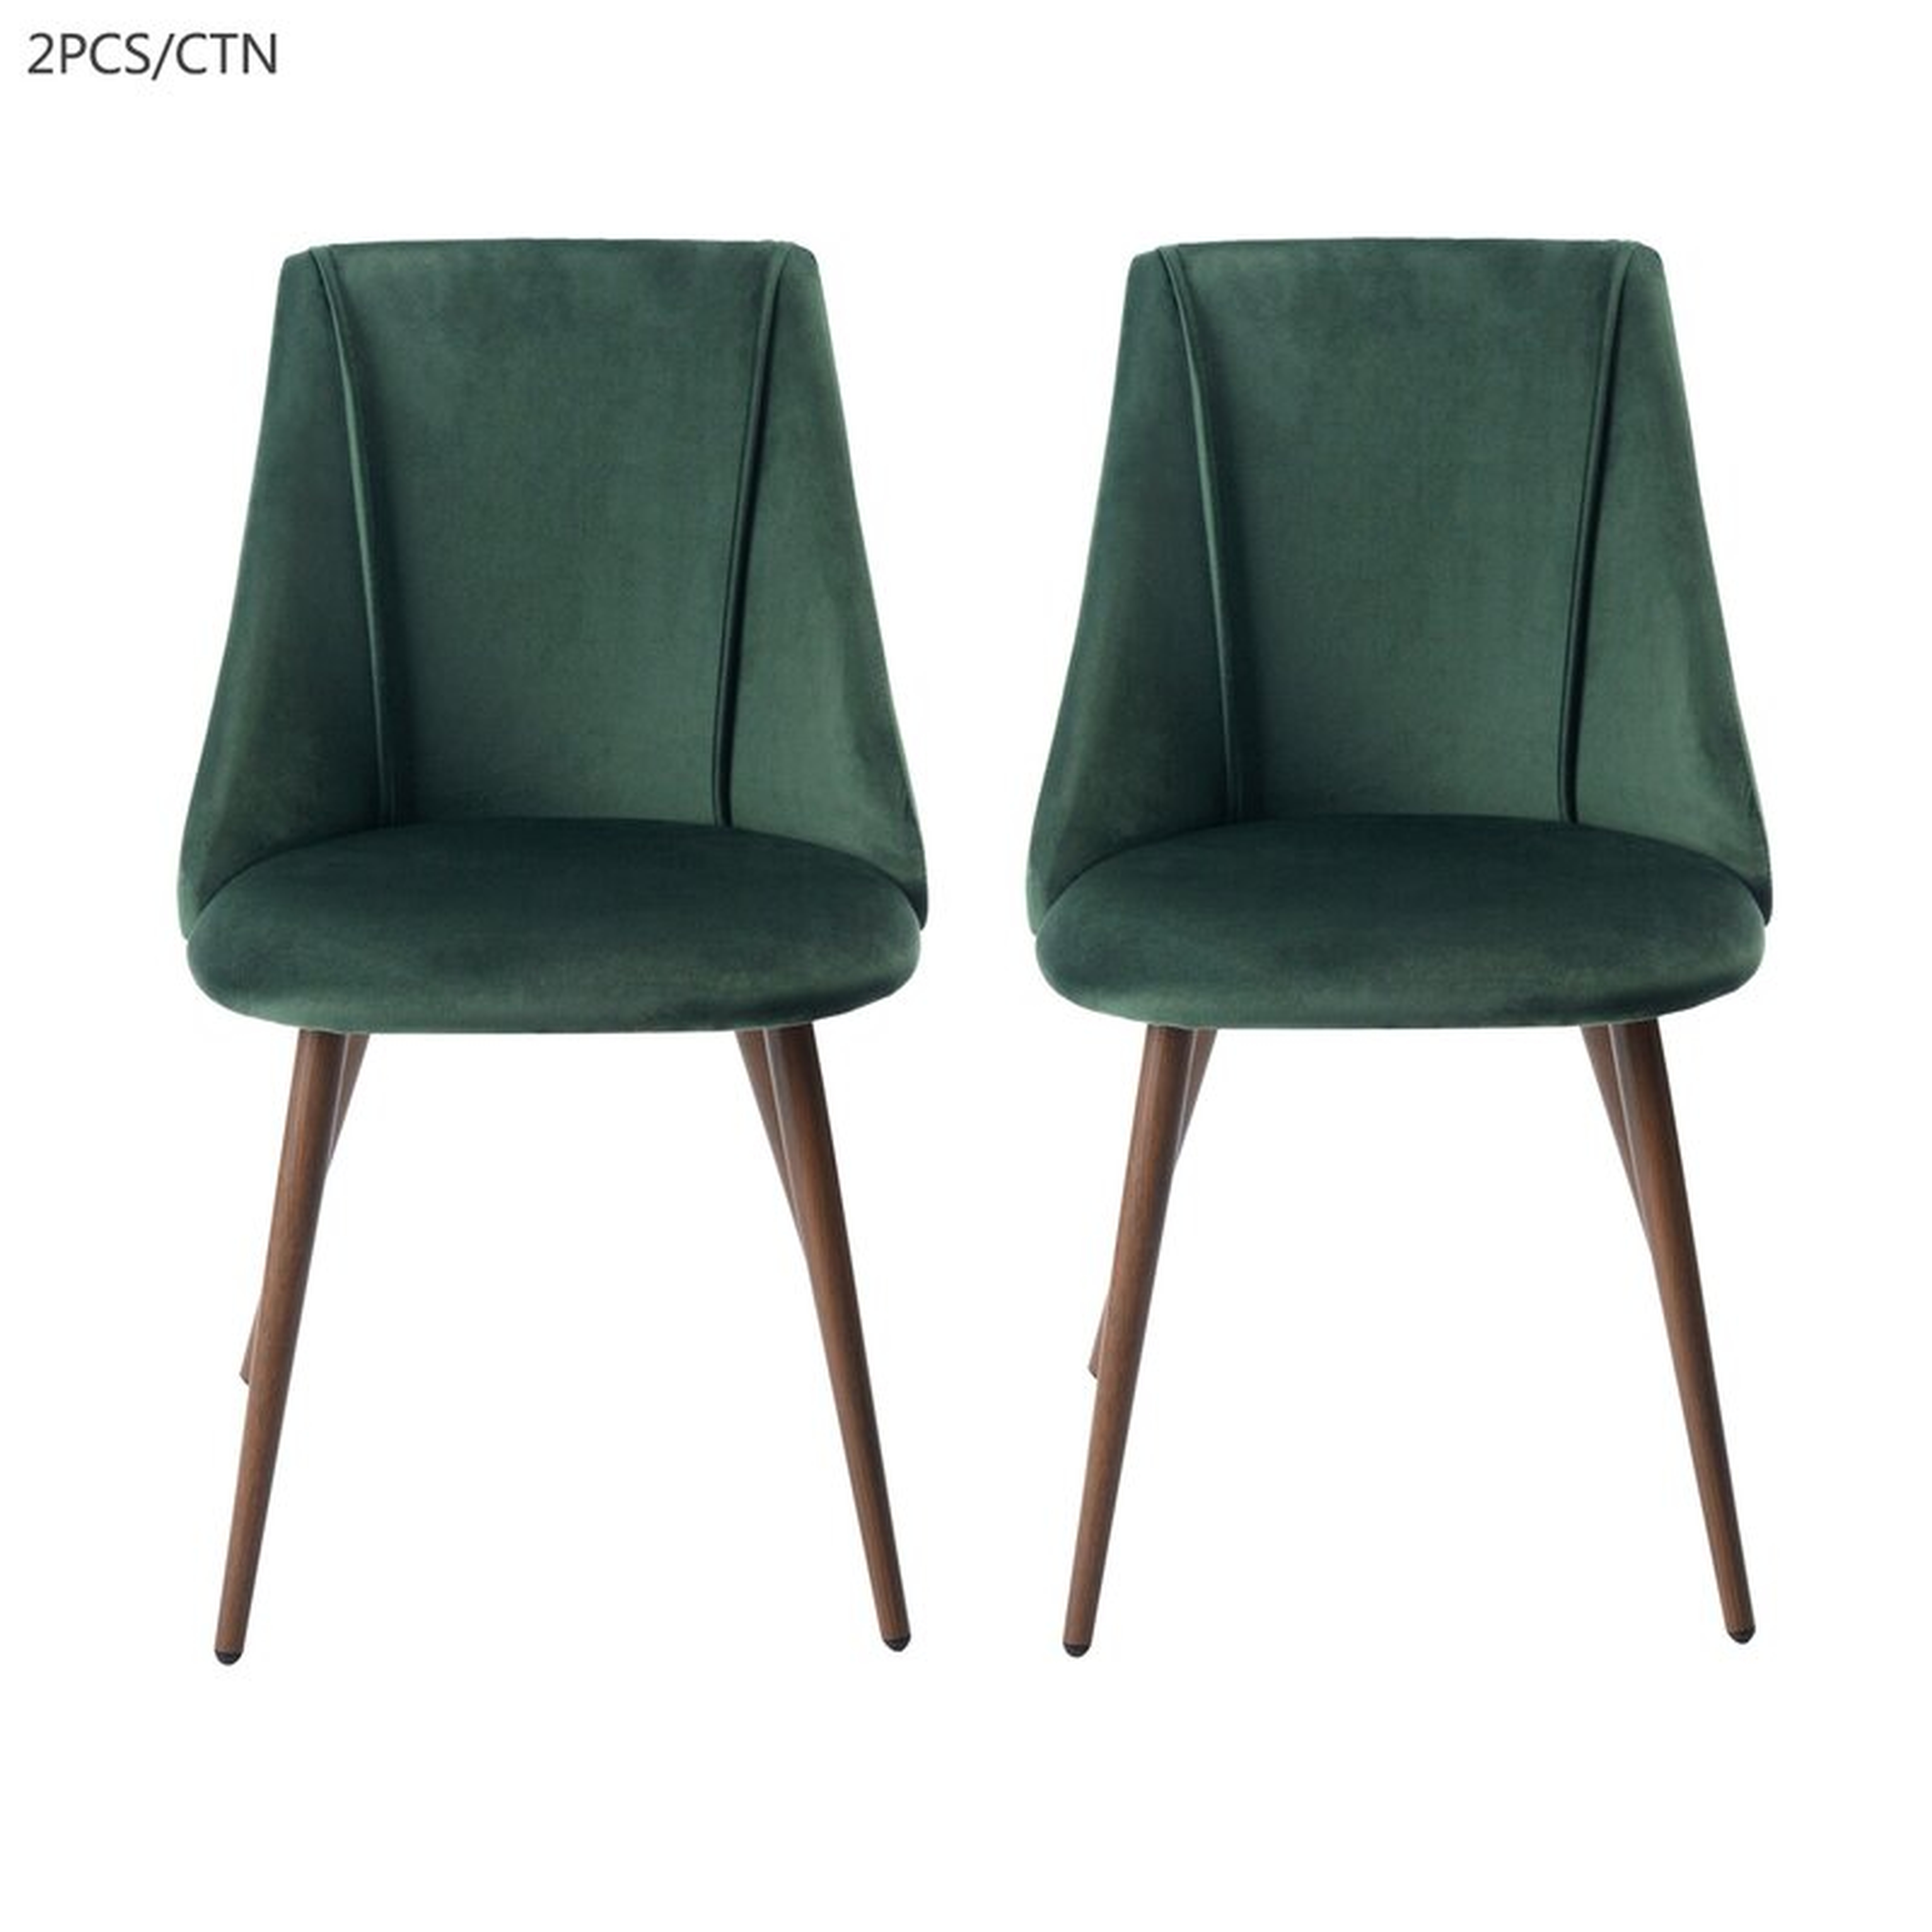 Camron Upholstered Side Chair (set of 2) - Wayfair